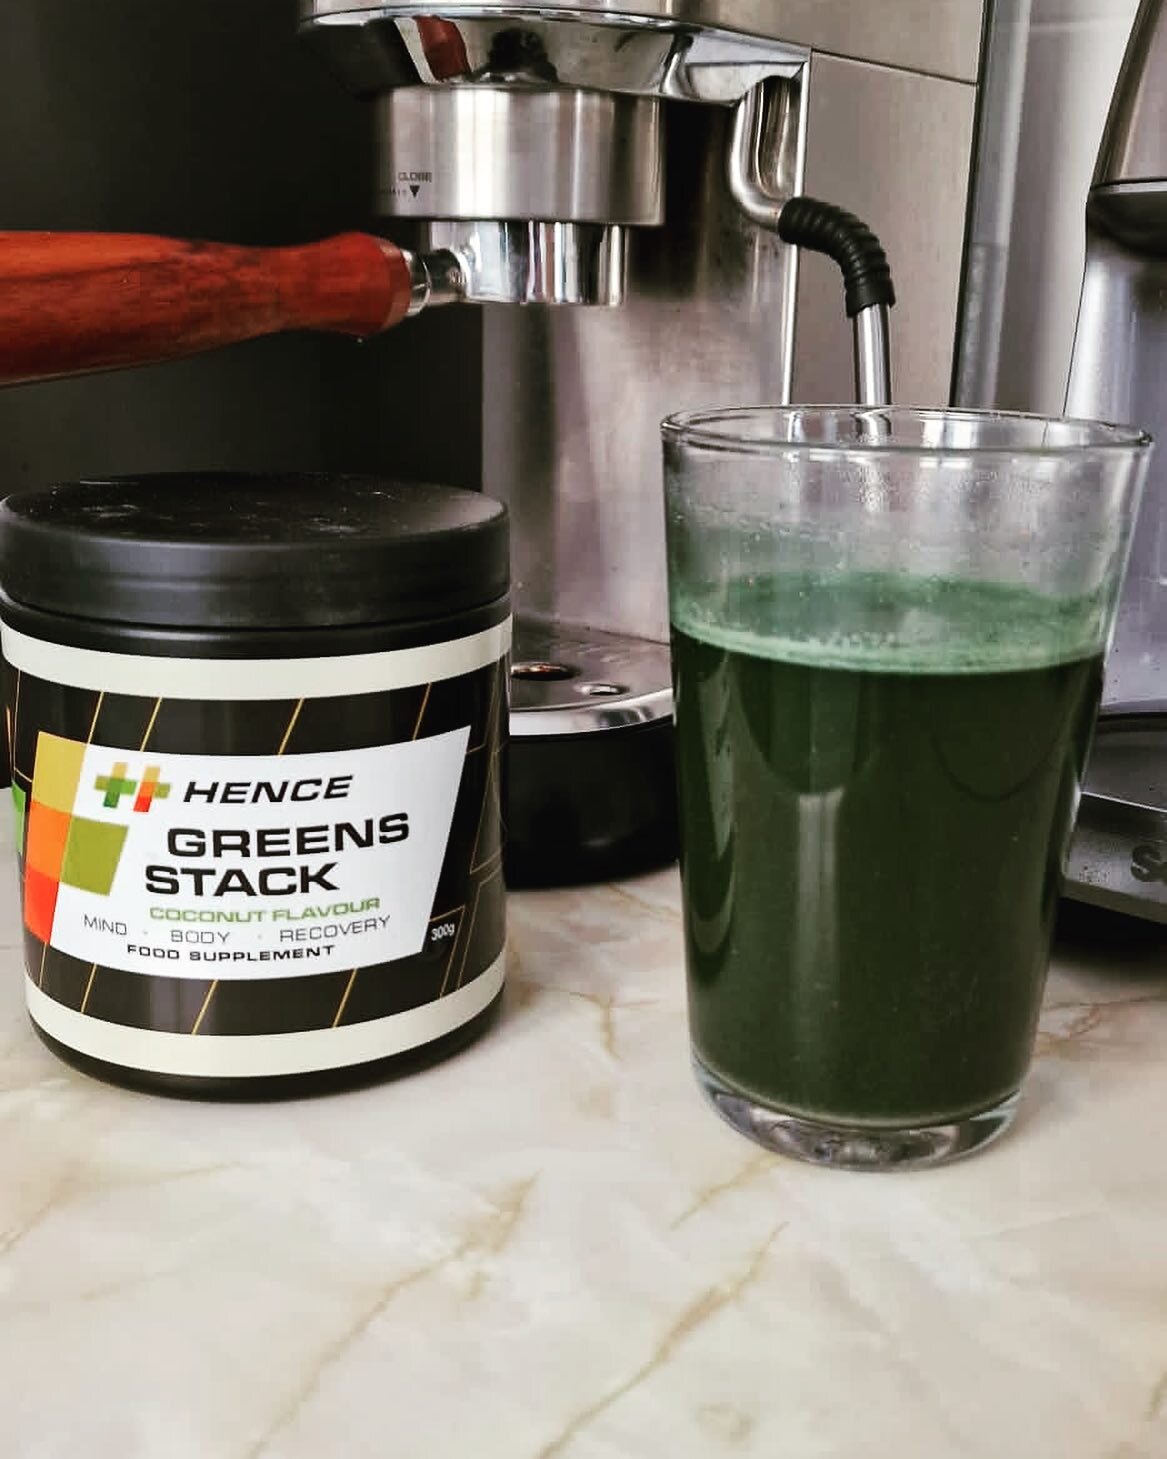 &ldquo;I have a 60 mile route check/planning ride today, green stacks to get me through!&rdquo; - @adventurevelo 

Micronutrients for the win 🌱

hencestacks.com

#bike #bikelove #bikelovers #cycle #cyclelife #cyclegram #cycleride #suoplements